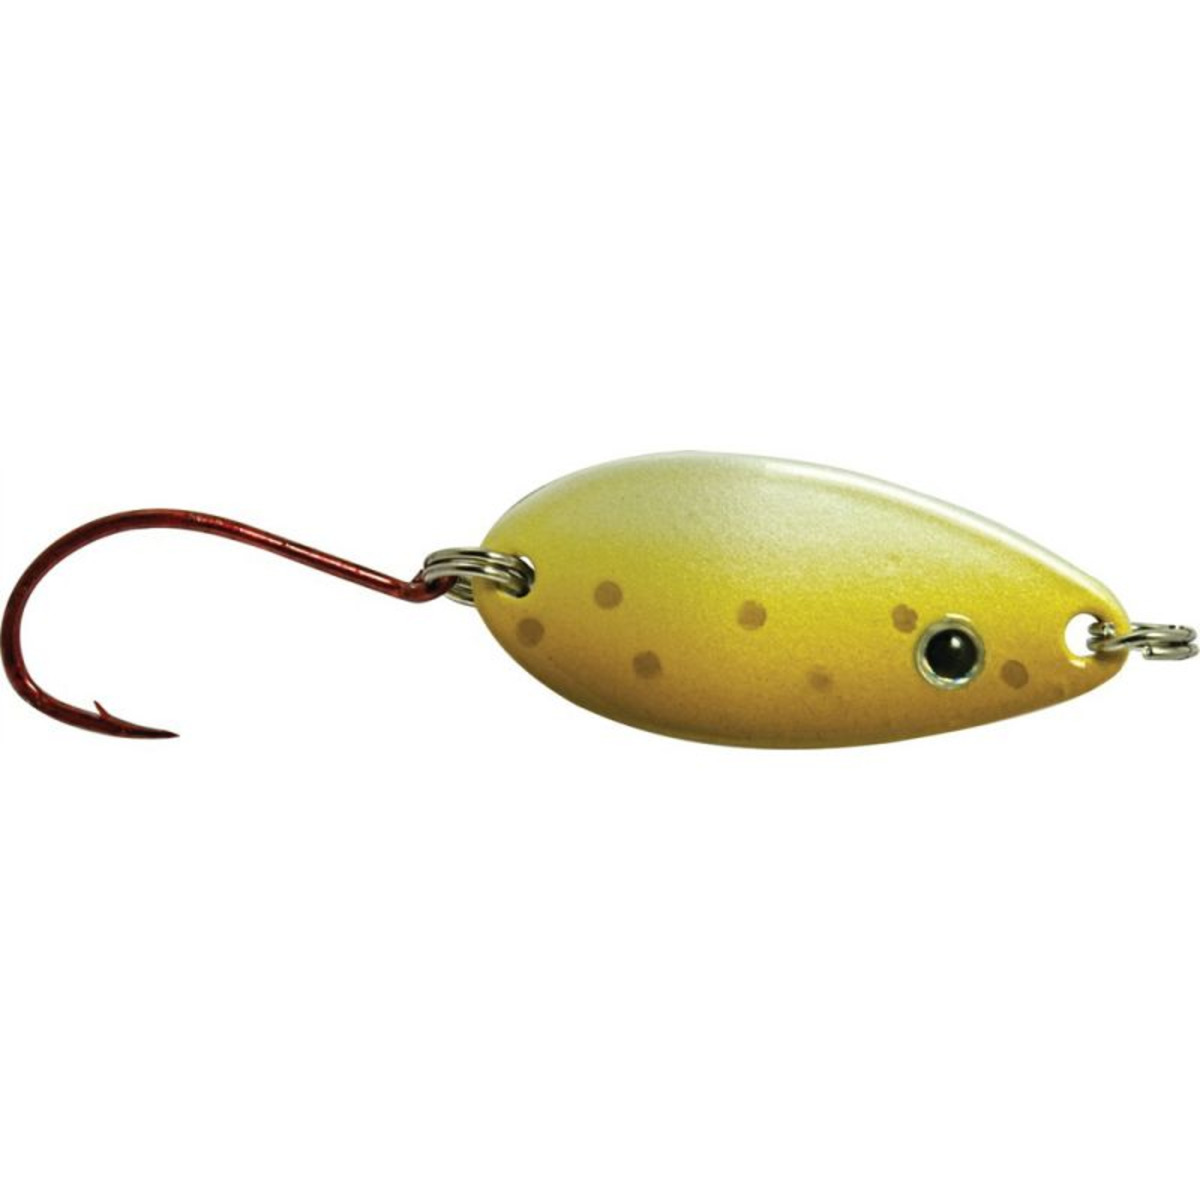 Rapture Brown Trout - 3.0 g - 32 mm - 10 - YT